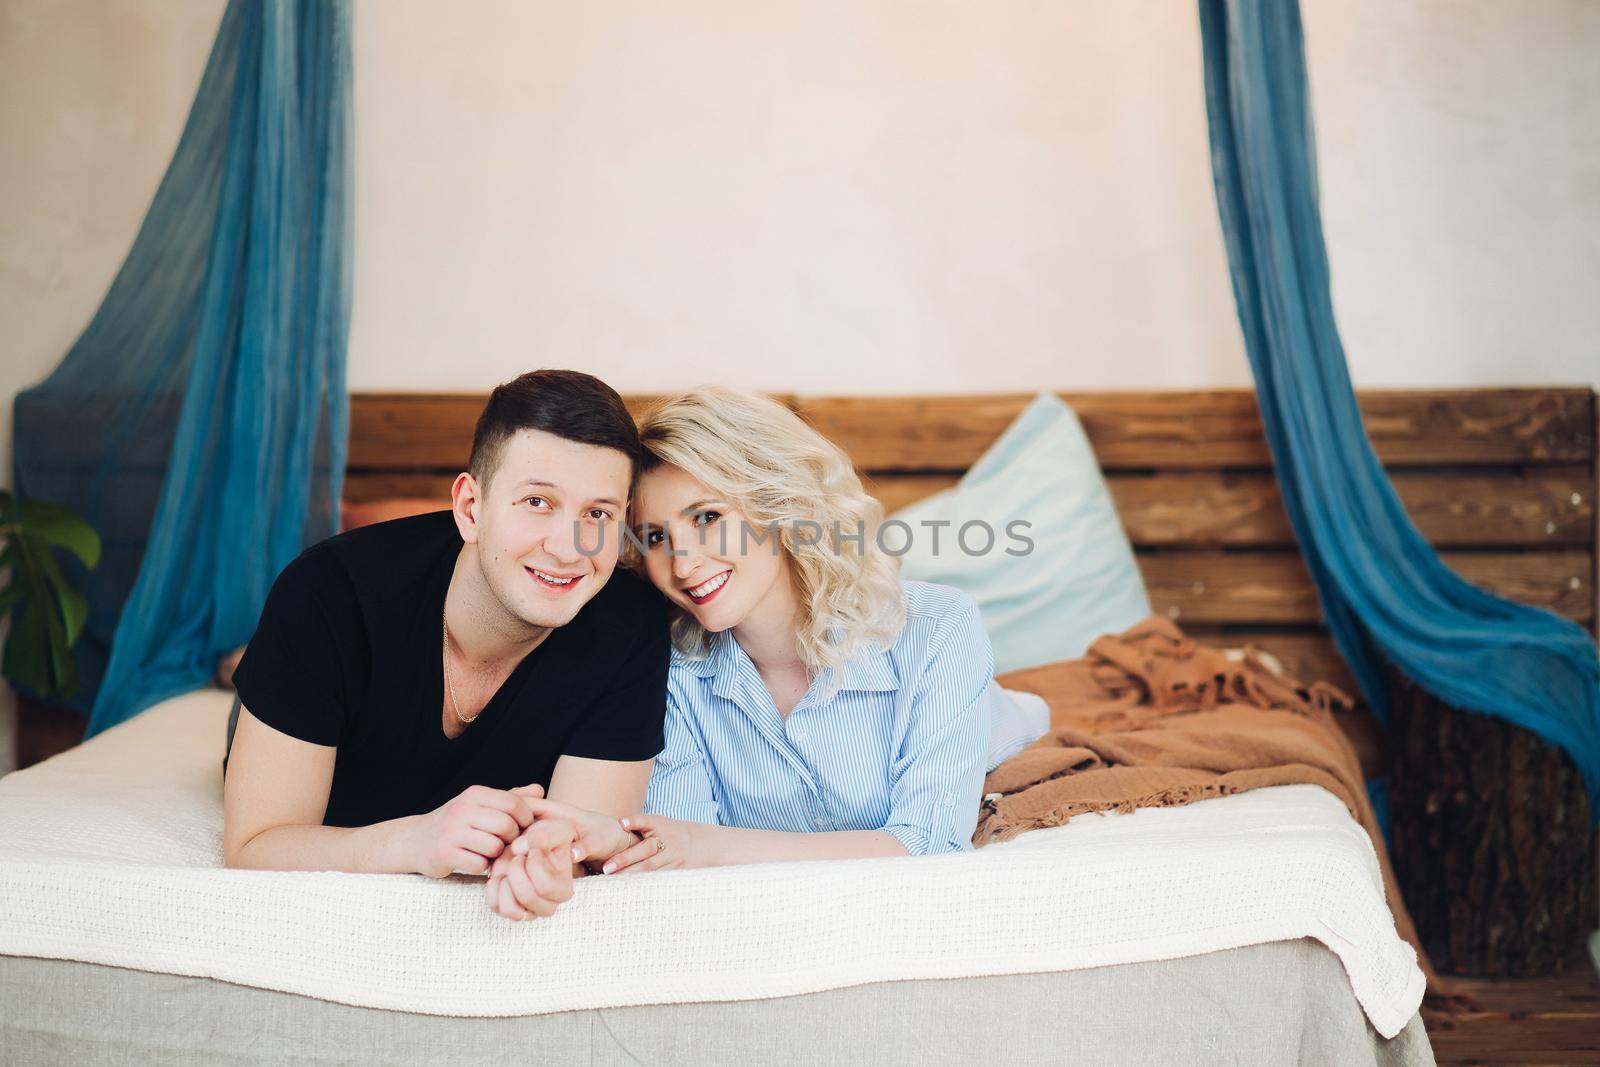 Young couple laying together on belly in white bed. Smiling and holding hands of each other, looking at camera. Blonde woman in striped shirt and a man in black tshirt.Concept of love and relationship.